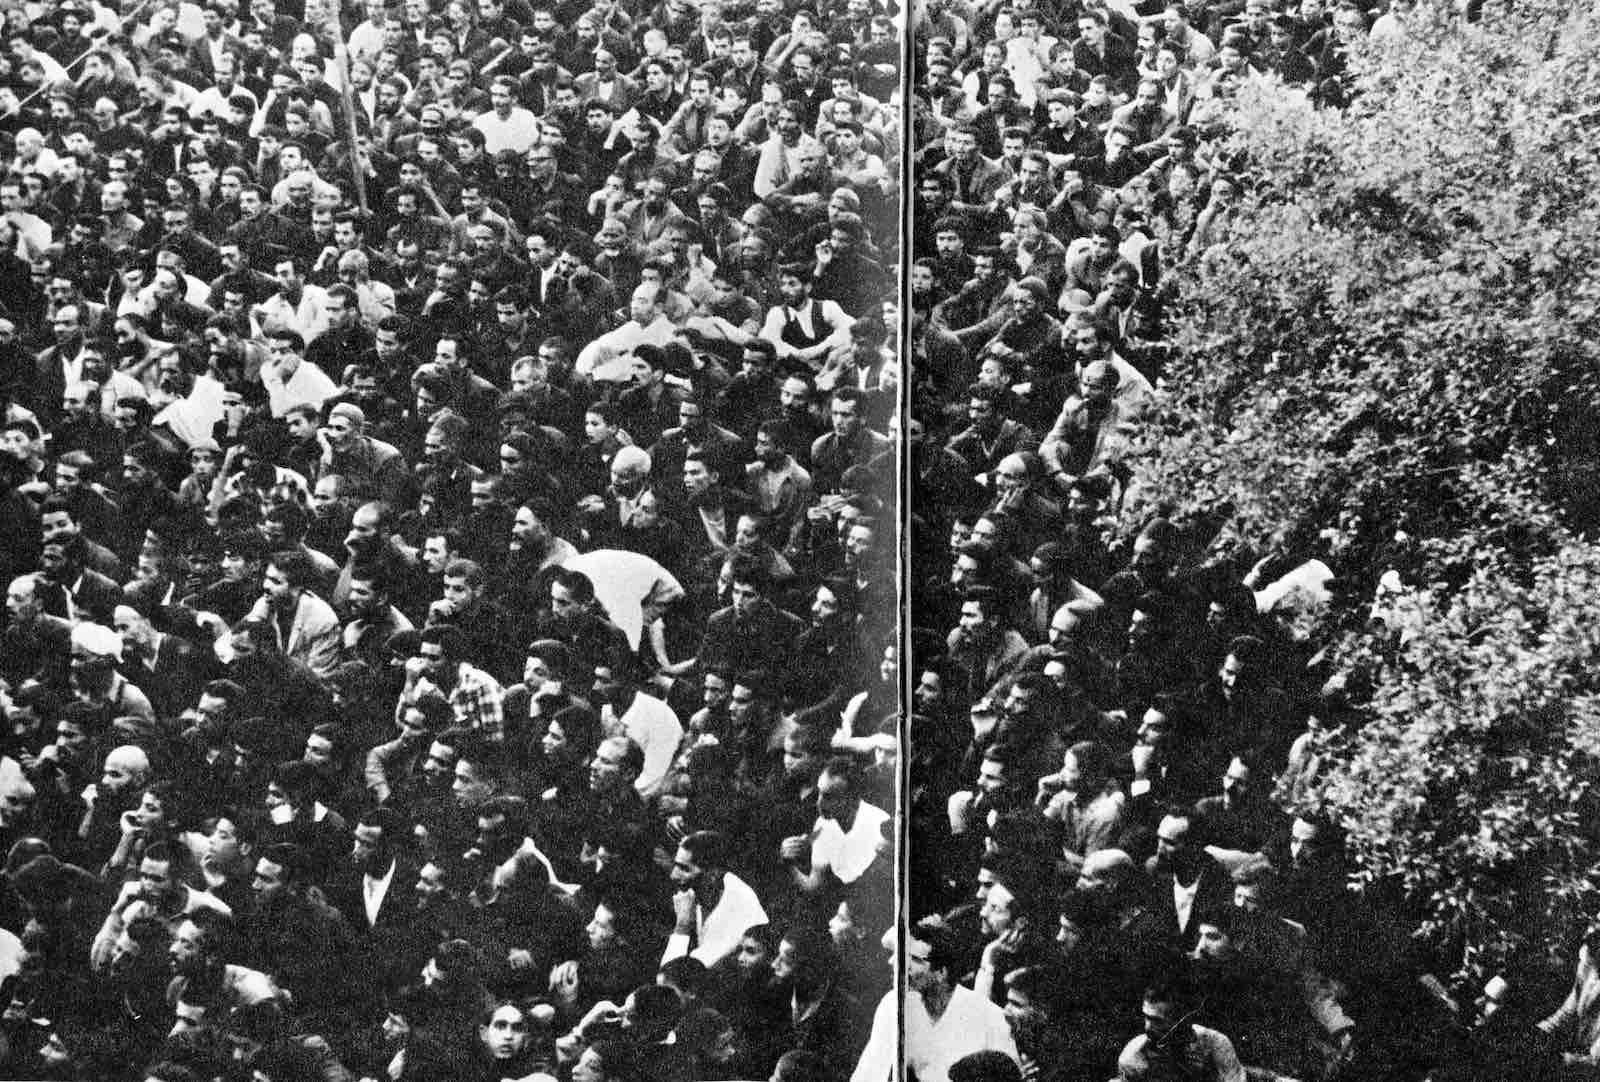 A large-format black and white archival image of a large crowd of men seated in an outdoor space.